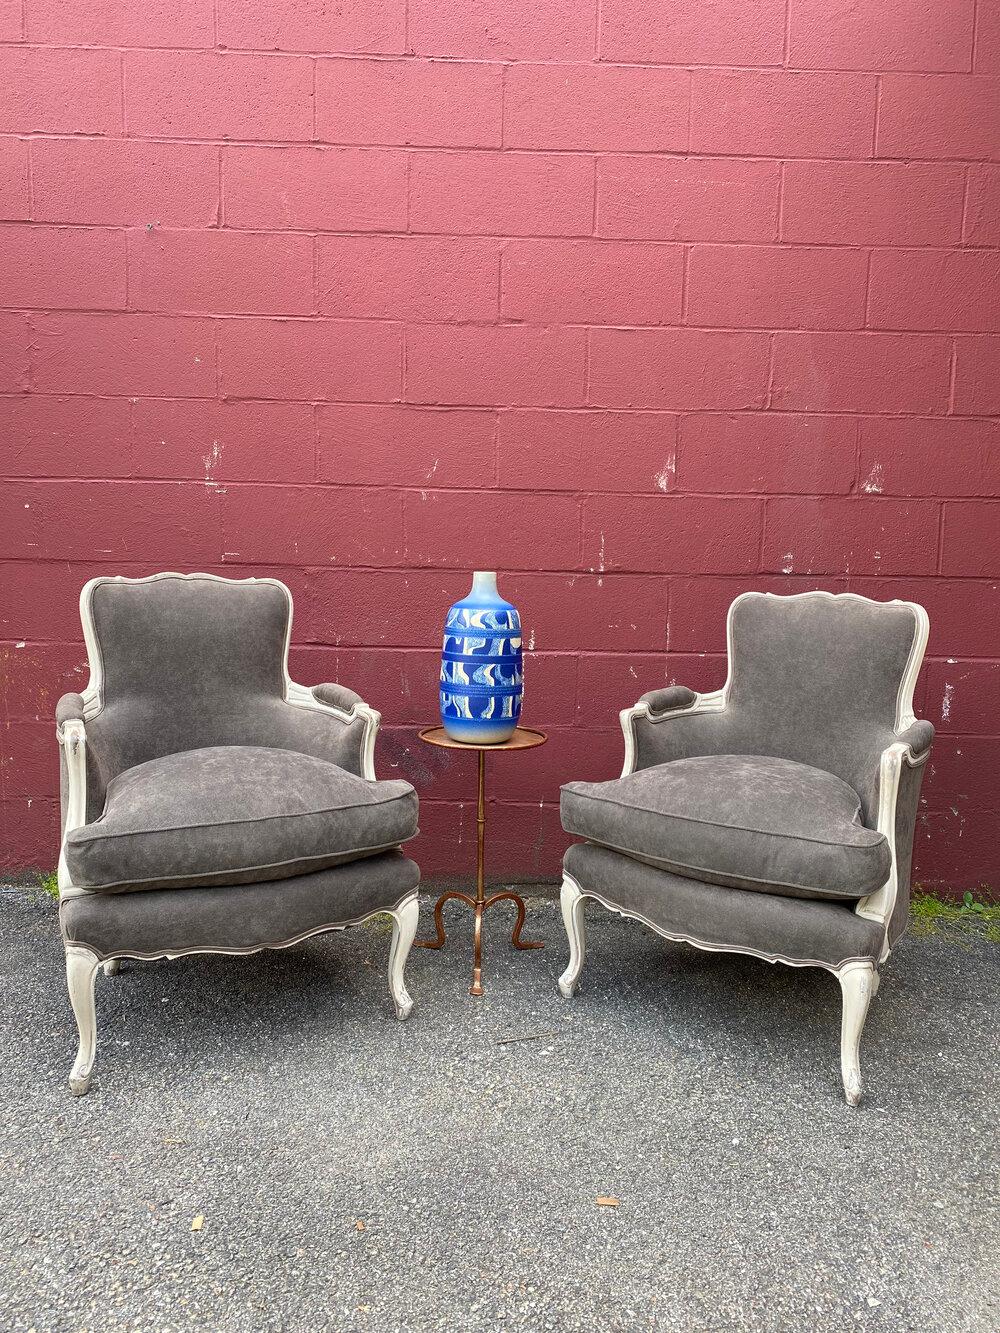 An elegant pair of French Louis XV style armchairs upholstered in gray fabric. Discover timeless beauty with this exquisite pair of Louis XV style bergeres. Timeless and luxurious, these chairs will add elegance and sophistication to any room. The